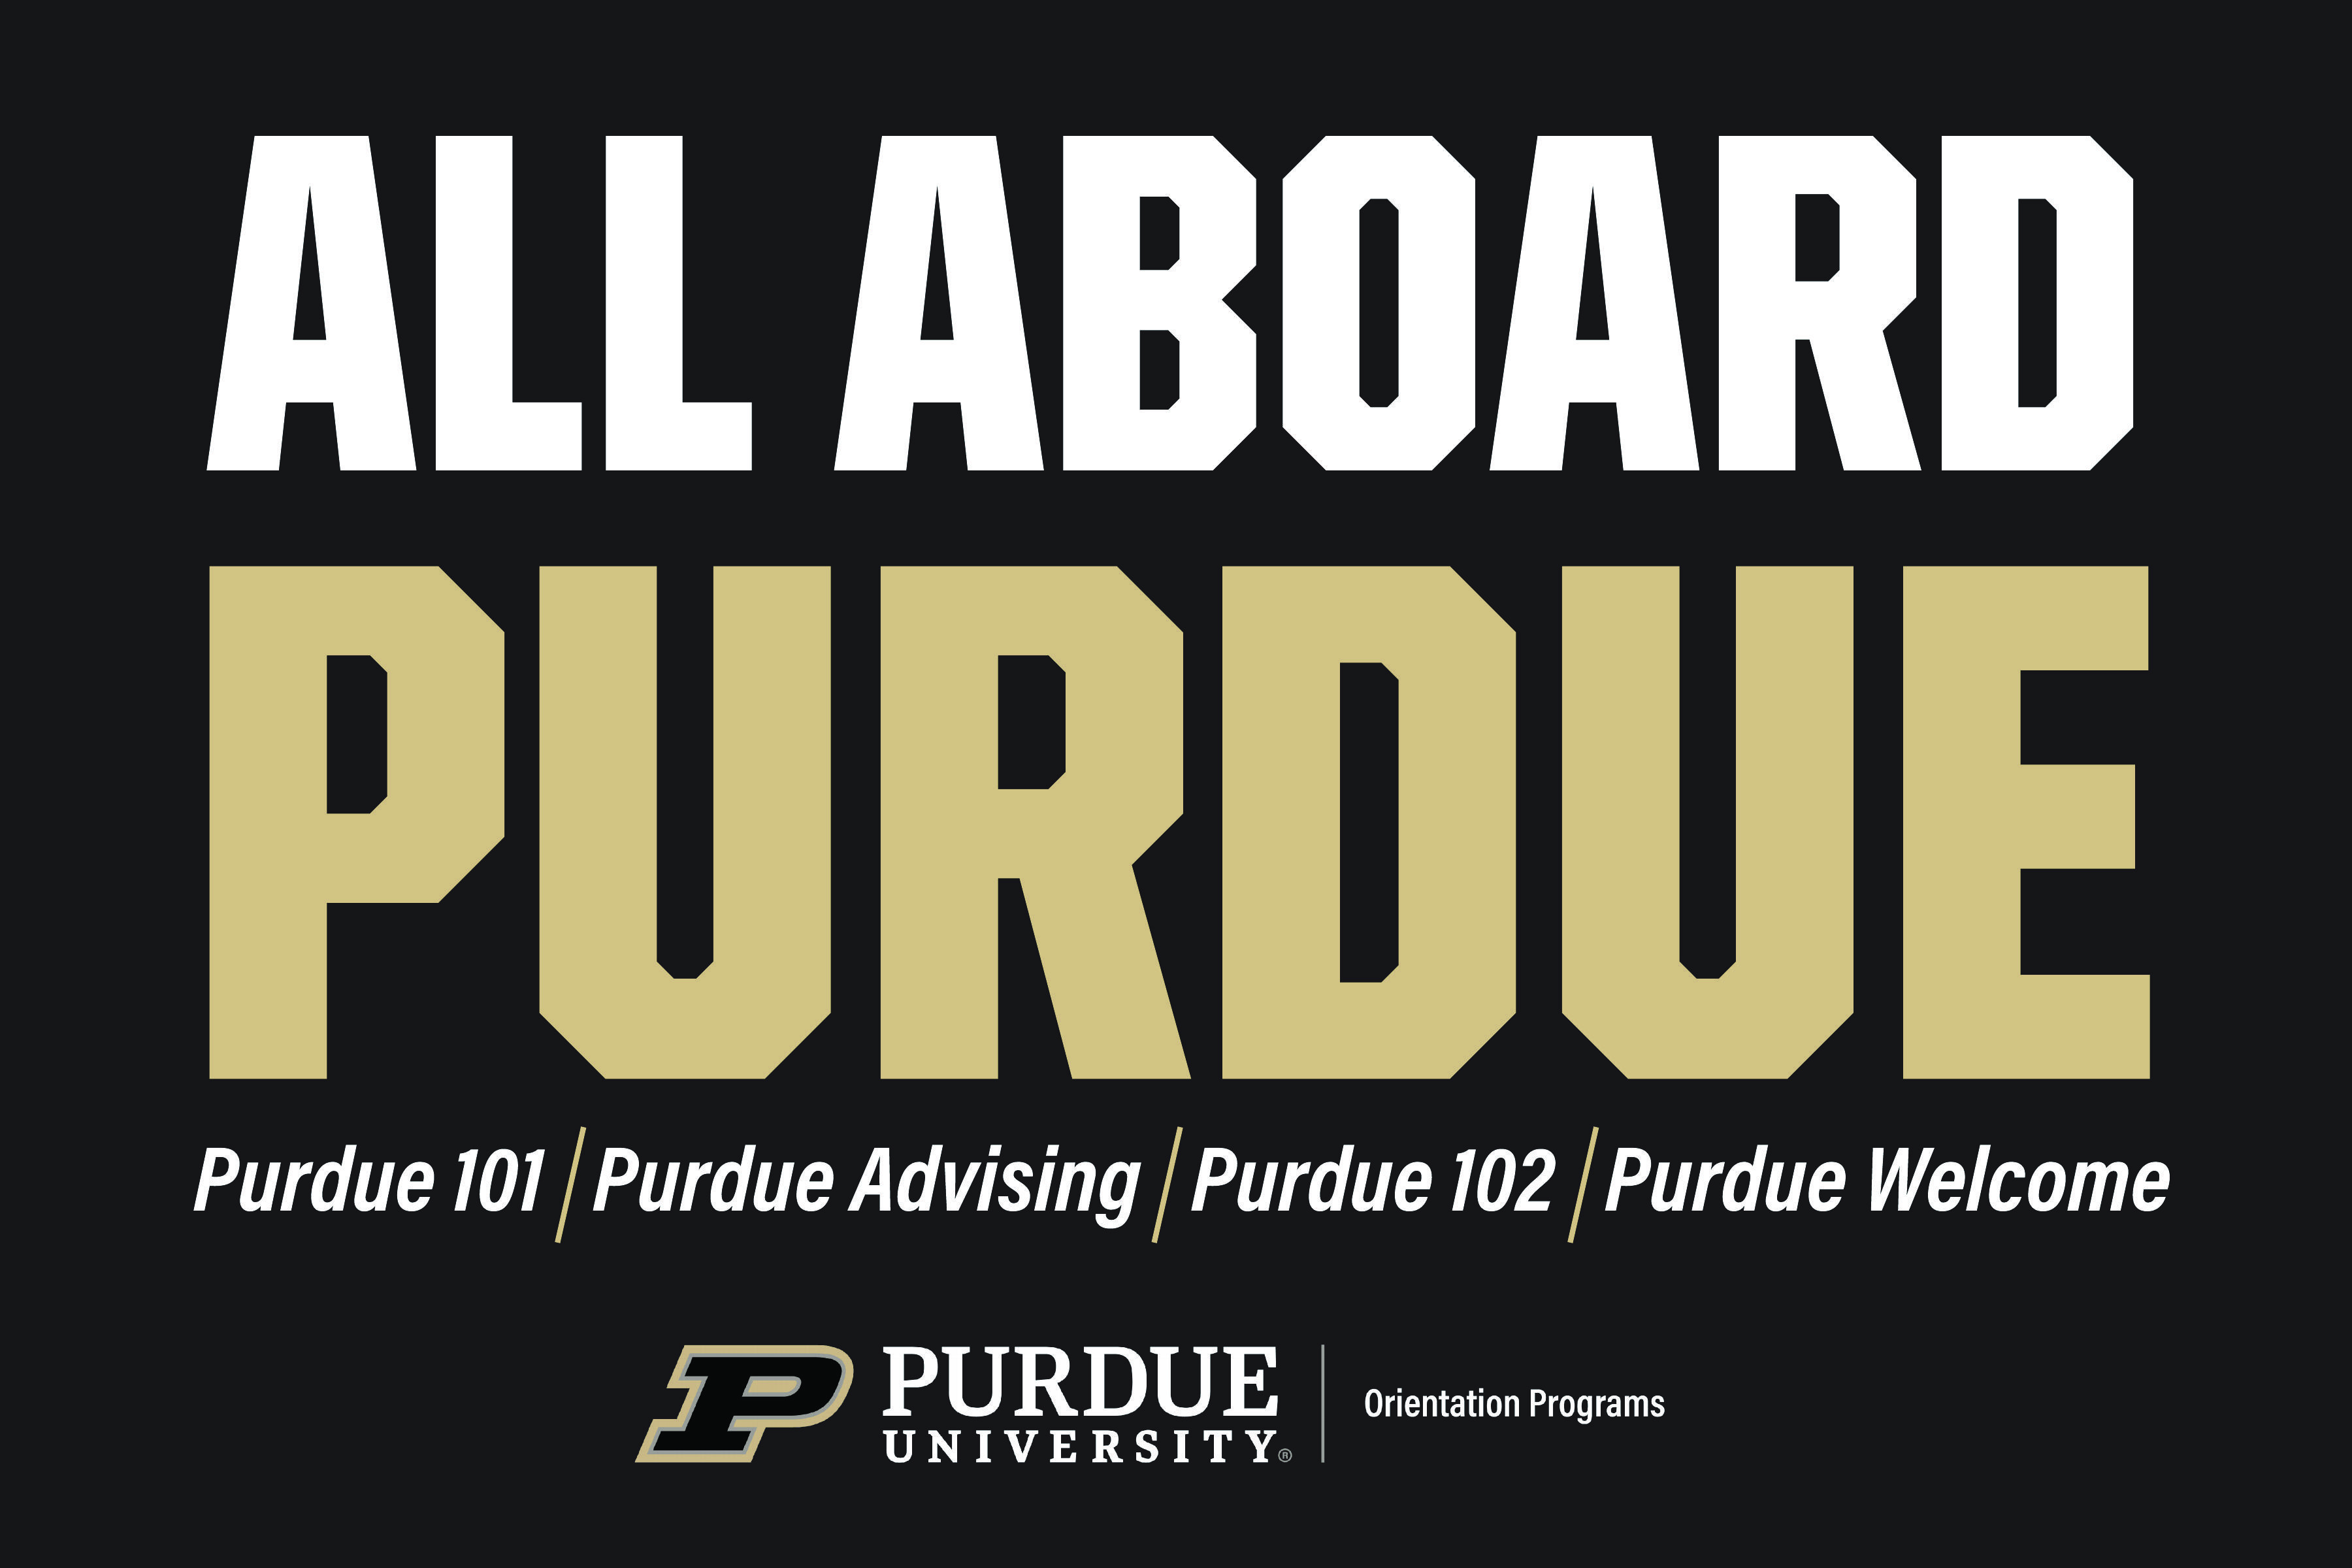 Image naming the four parts new of Orientation: Purdue 101, 102, Purdue Advising, and Purdue Welcome. More information is below